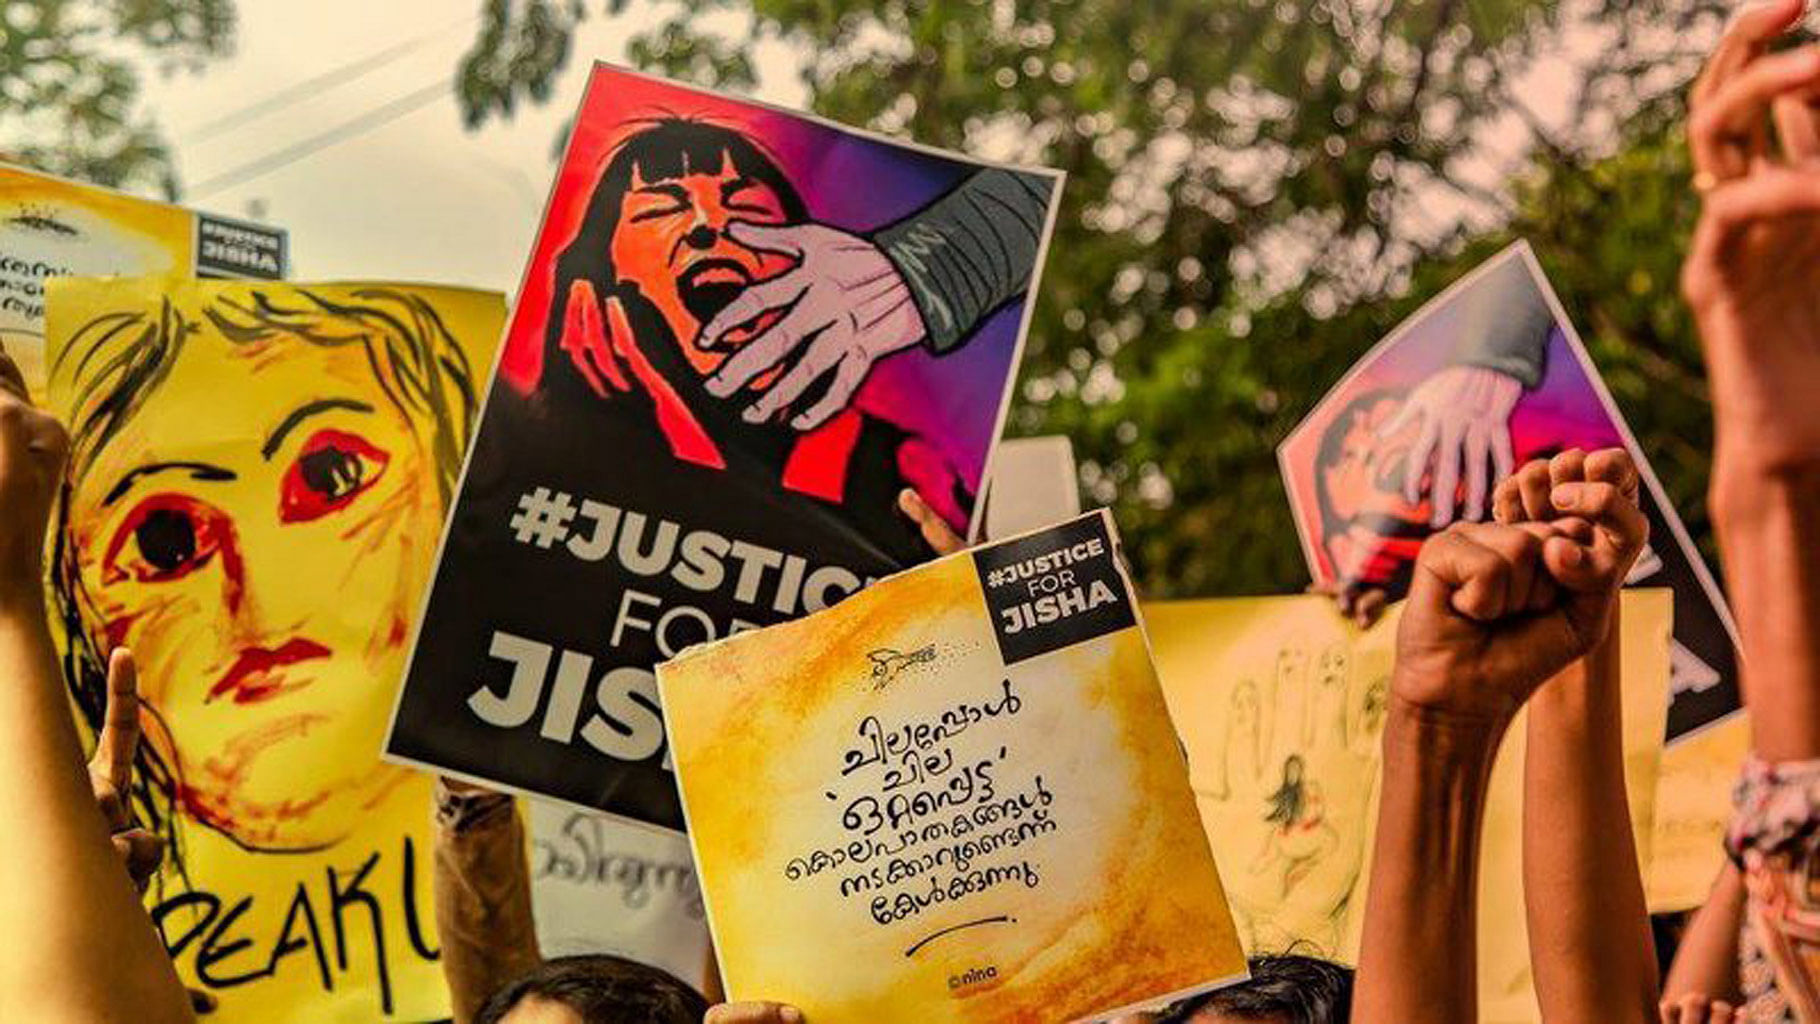 Despite the brutality of Jisha’s rape, it took a while for mainstream media to report on it in a sustained manner. (Photo Courtesy: <a href="https://www.change.org/p/arrest-the-accused-in-the-jisha-rape-murder-case-justiceforjisha?utm_source=action_alert&amp;utm_medium=email&amp;utm_campaign=576086&amp;alert_id=DUXEklRnJh_XBxfJchMMqcb5XQOXaVPBE3Zn%2B5s09CEwCKPzAjVRGw%3D">Change.org</a>)